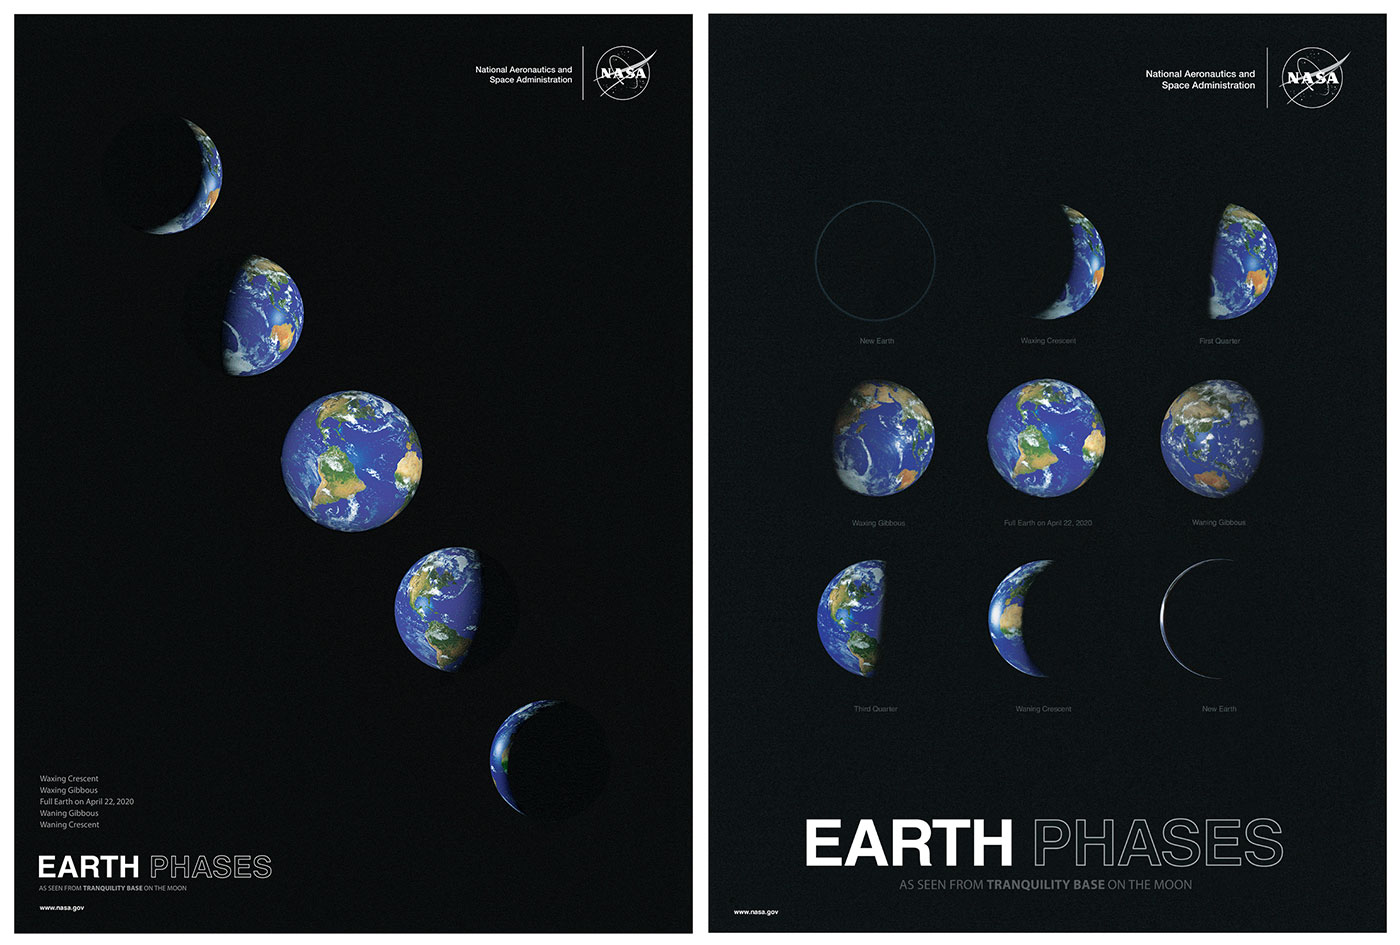 Earth phases